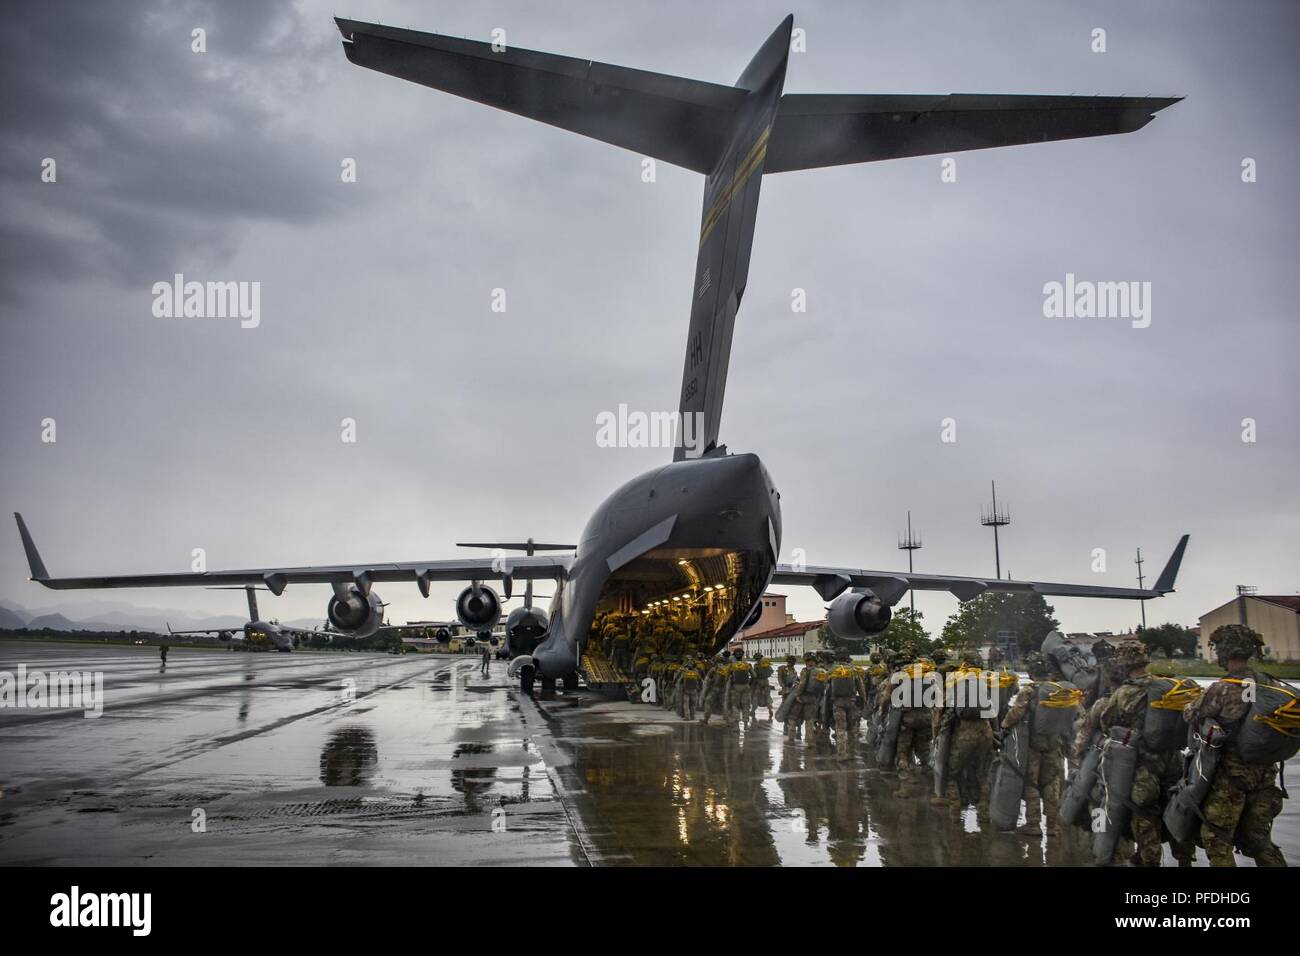 The tail of the US Air Force C-17 Globemaster reaches to the